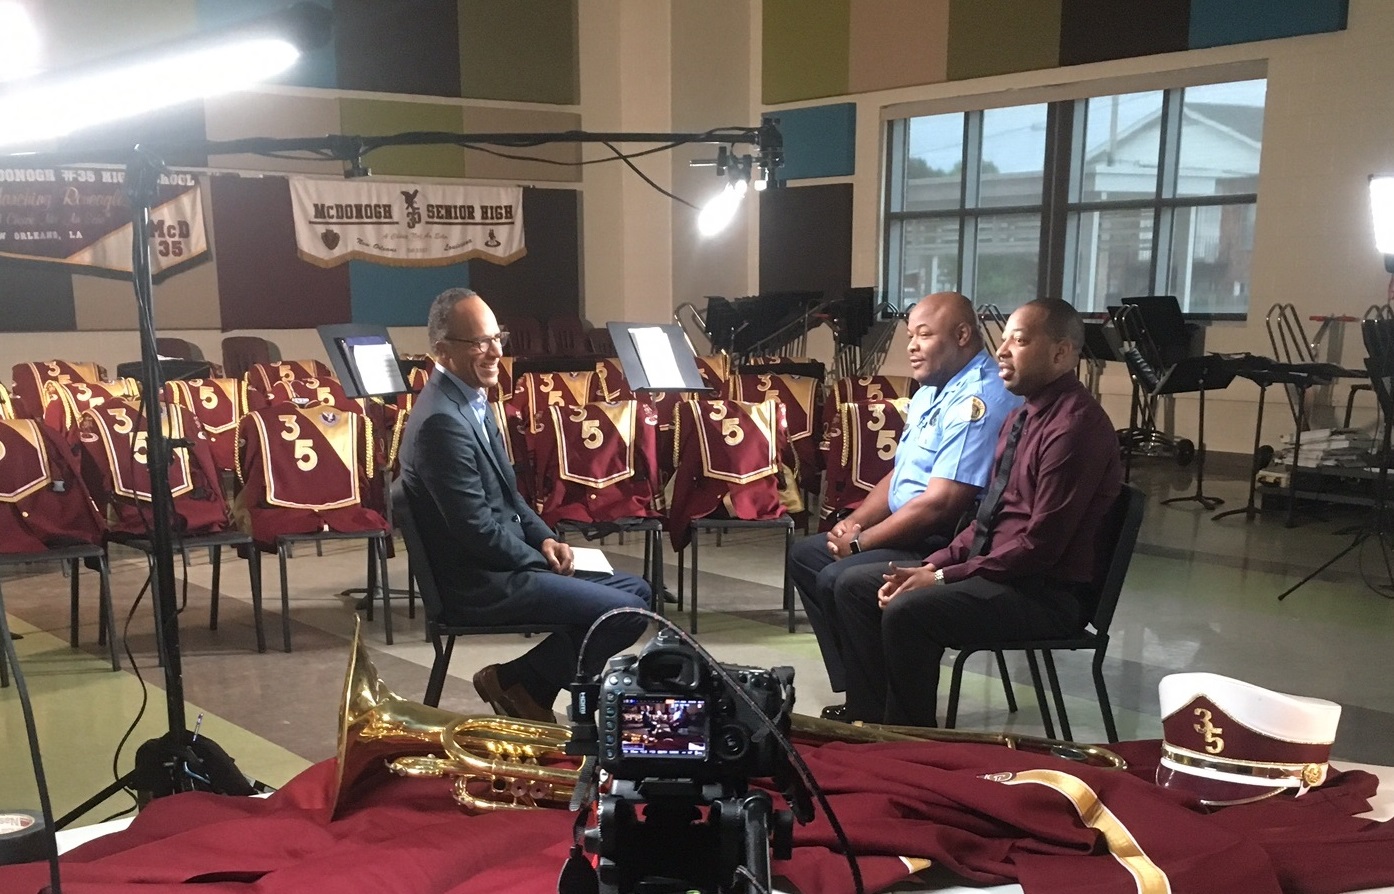 In Case you Missed it...NBC Nightly News with Lester Holt  Featured Two NOPD Officers 